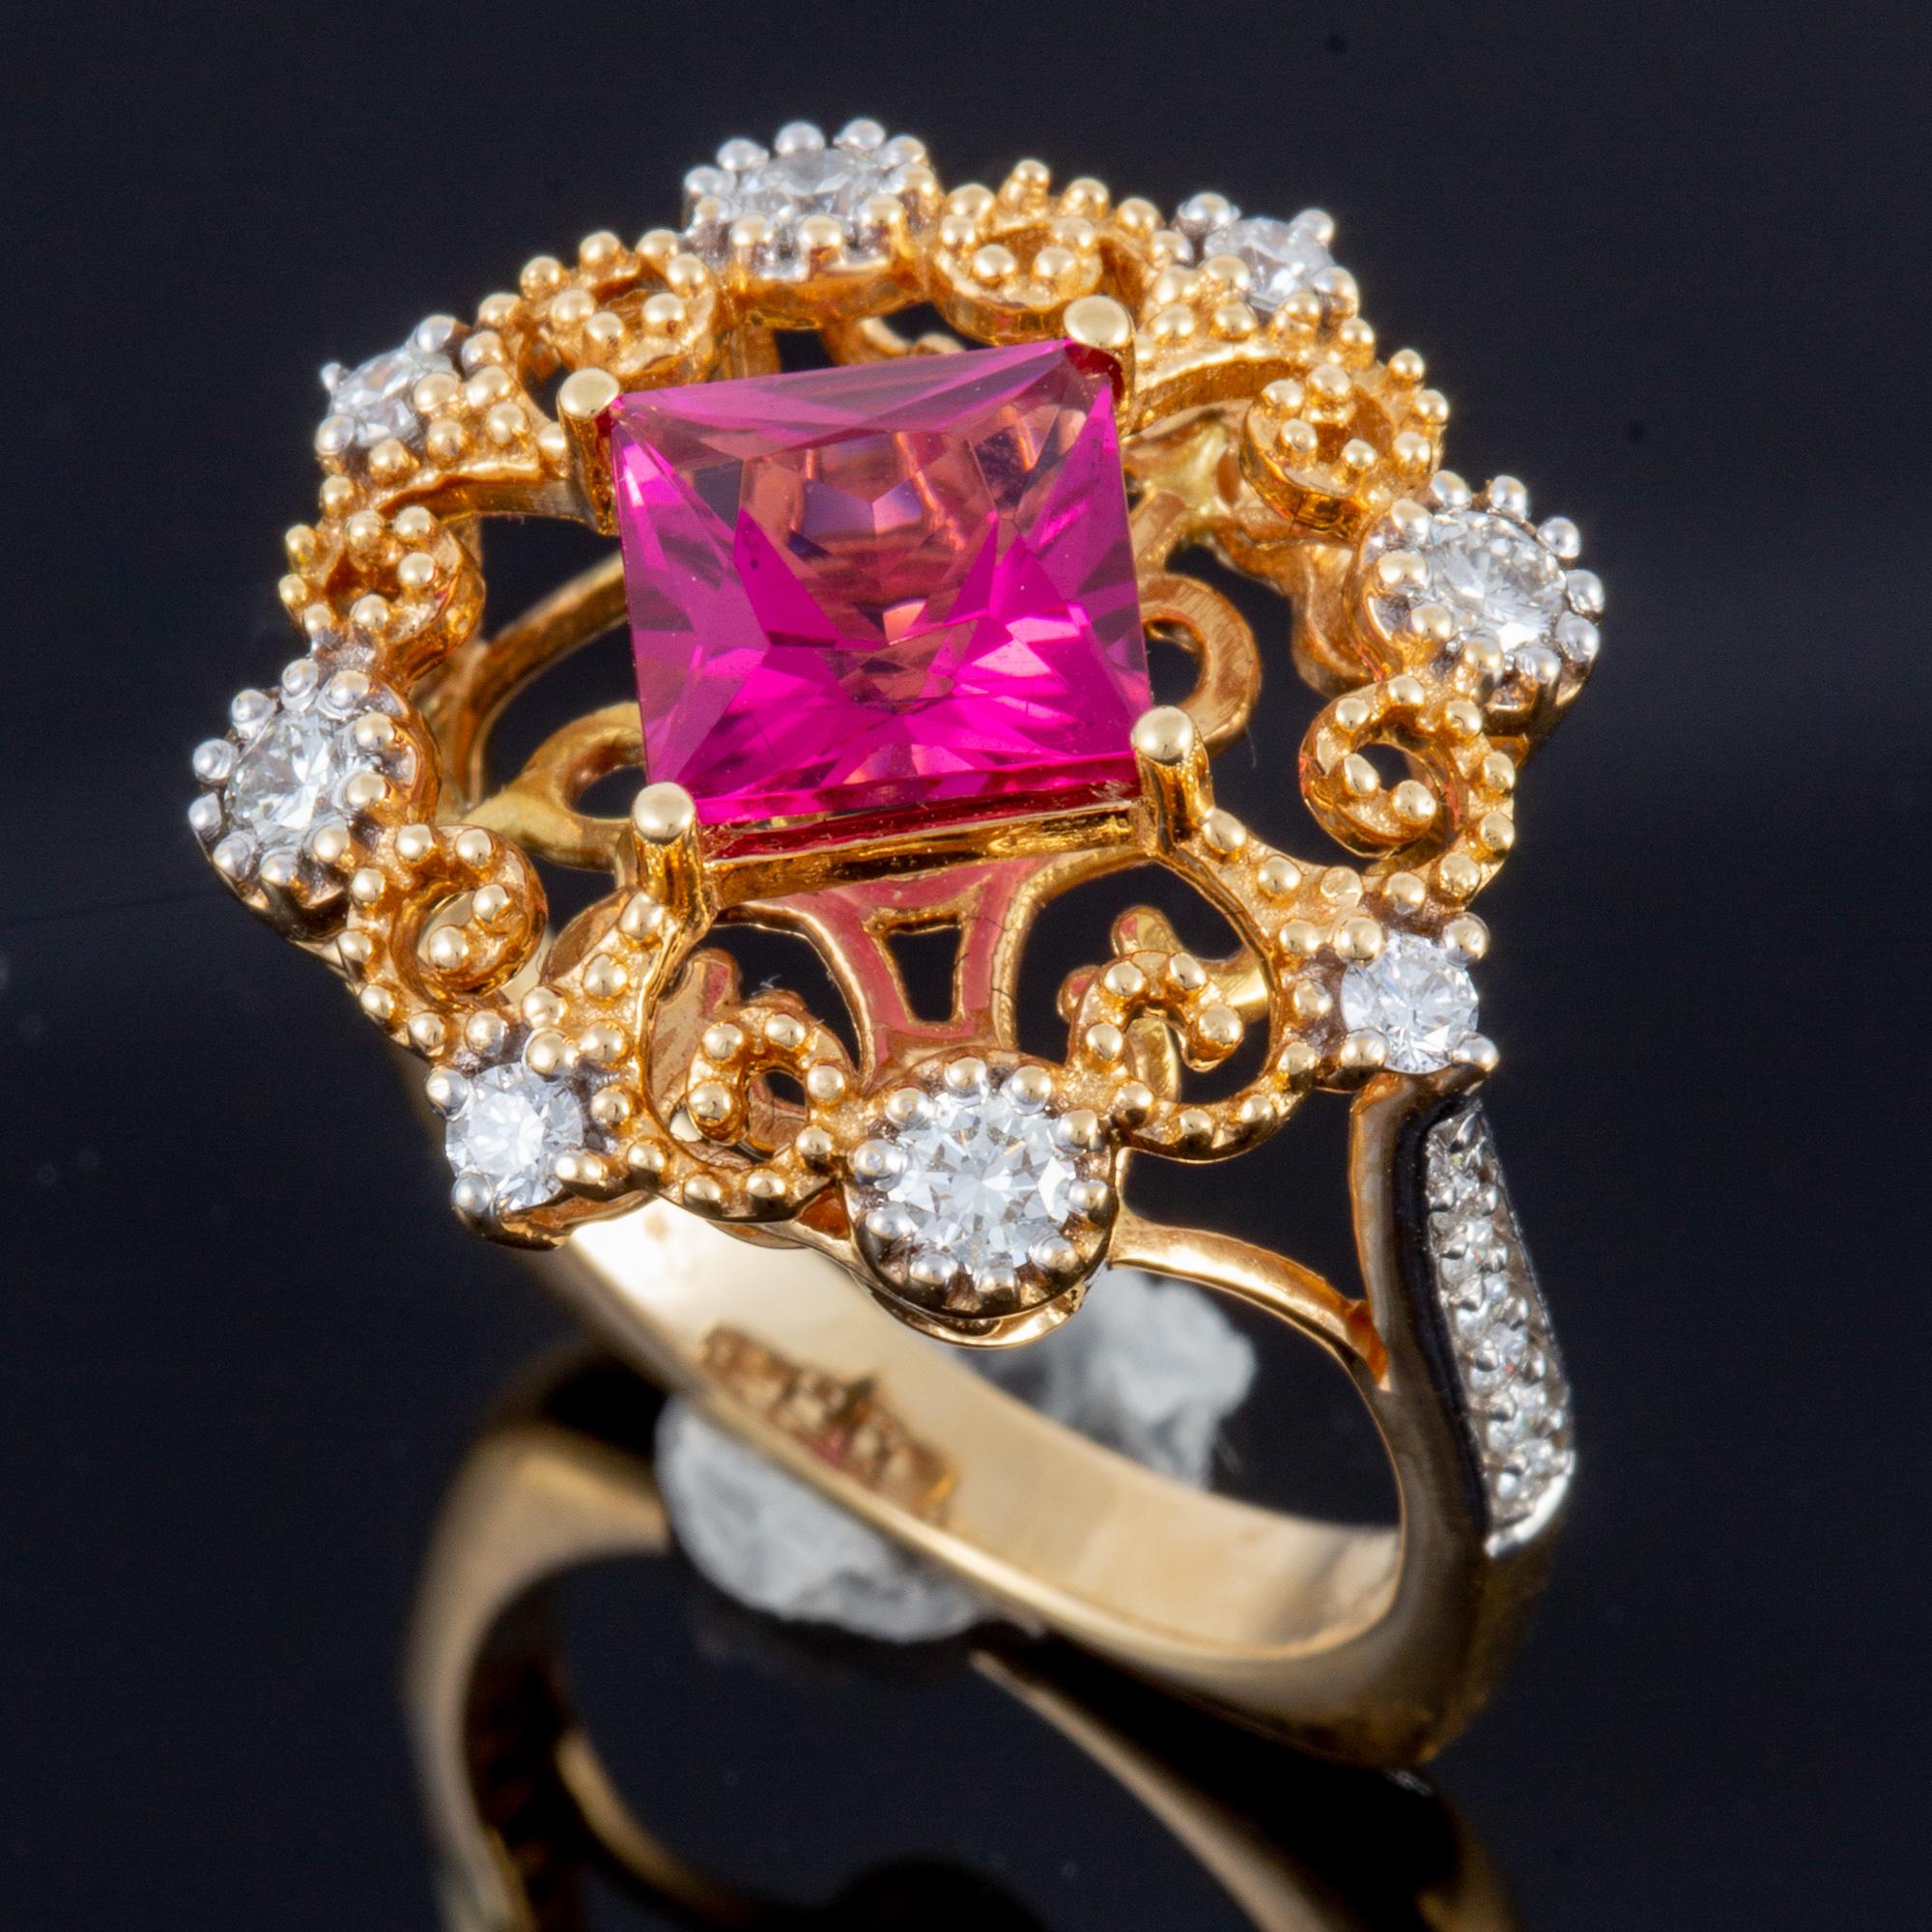 Rubellite Tourmaline and Diamond Ring set in 18 kt Gold For Sale 13